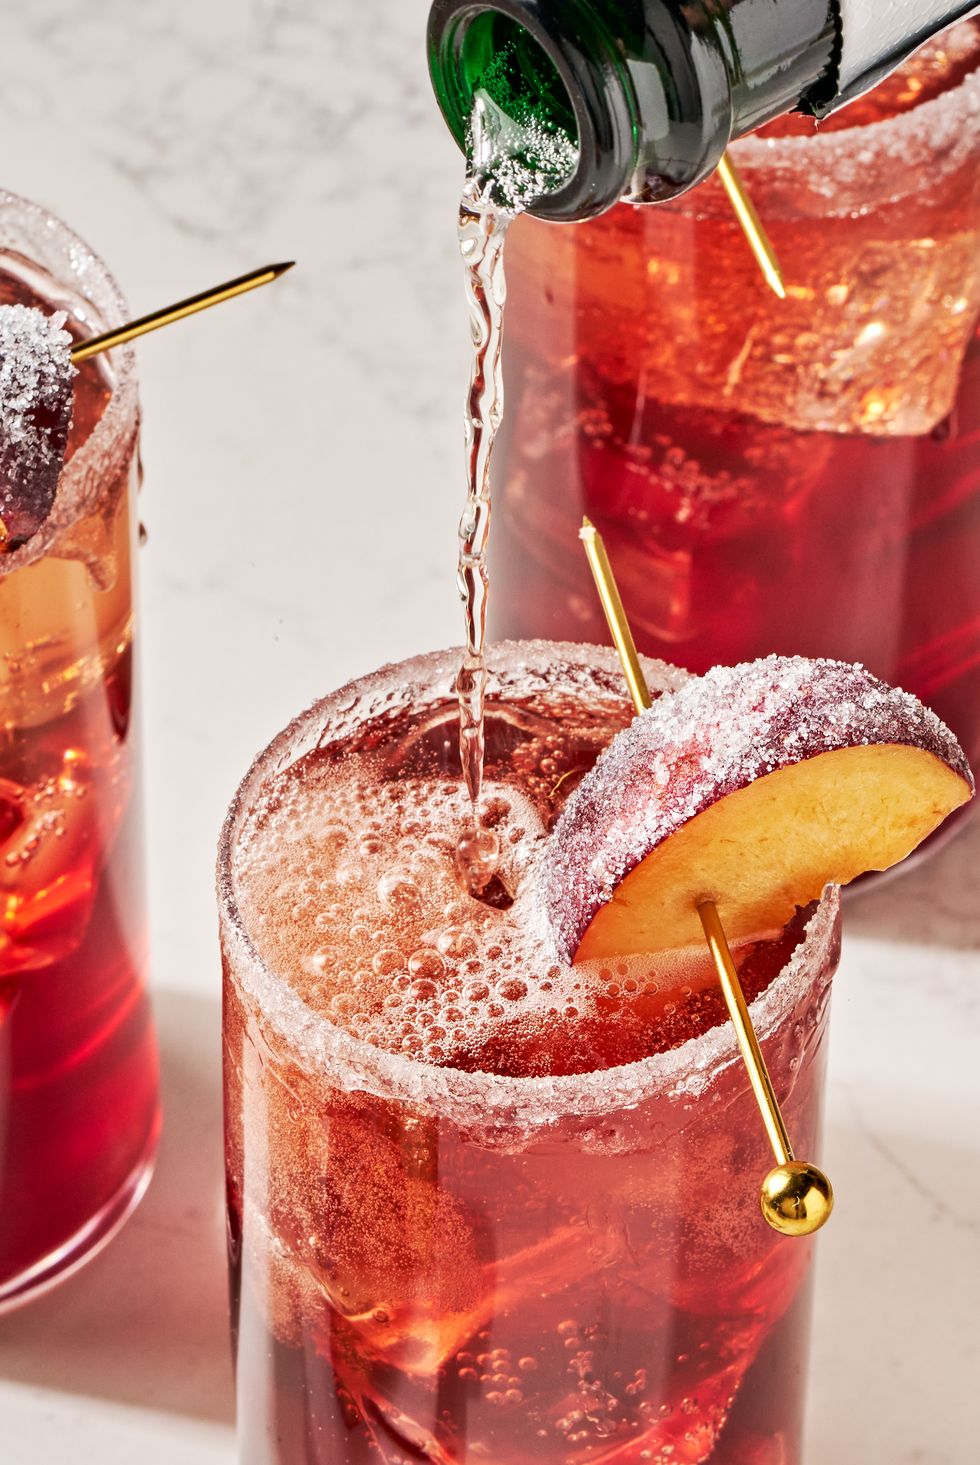 a refreshing holiday cocktail with plum wine, prosecco, maraschino cherry syrup, lemon, and bitters, garnished with a sugared plum